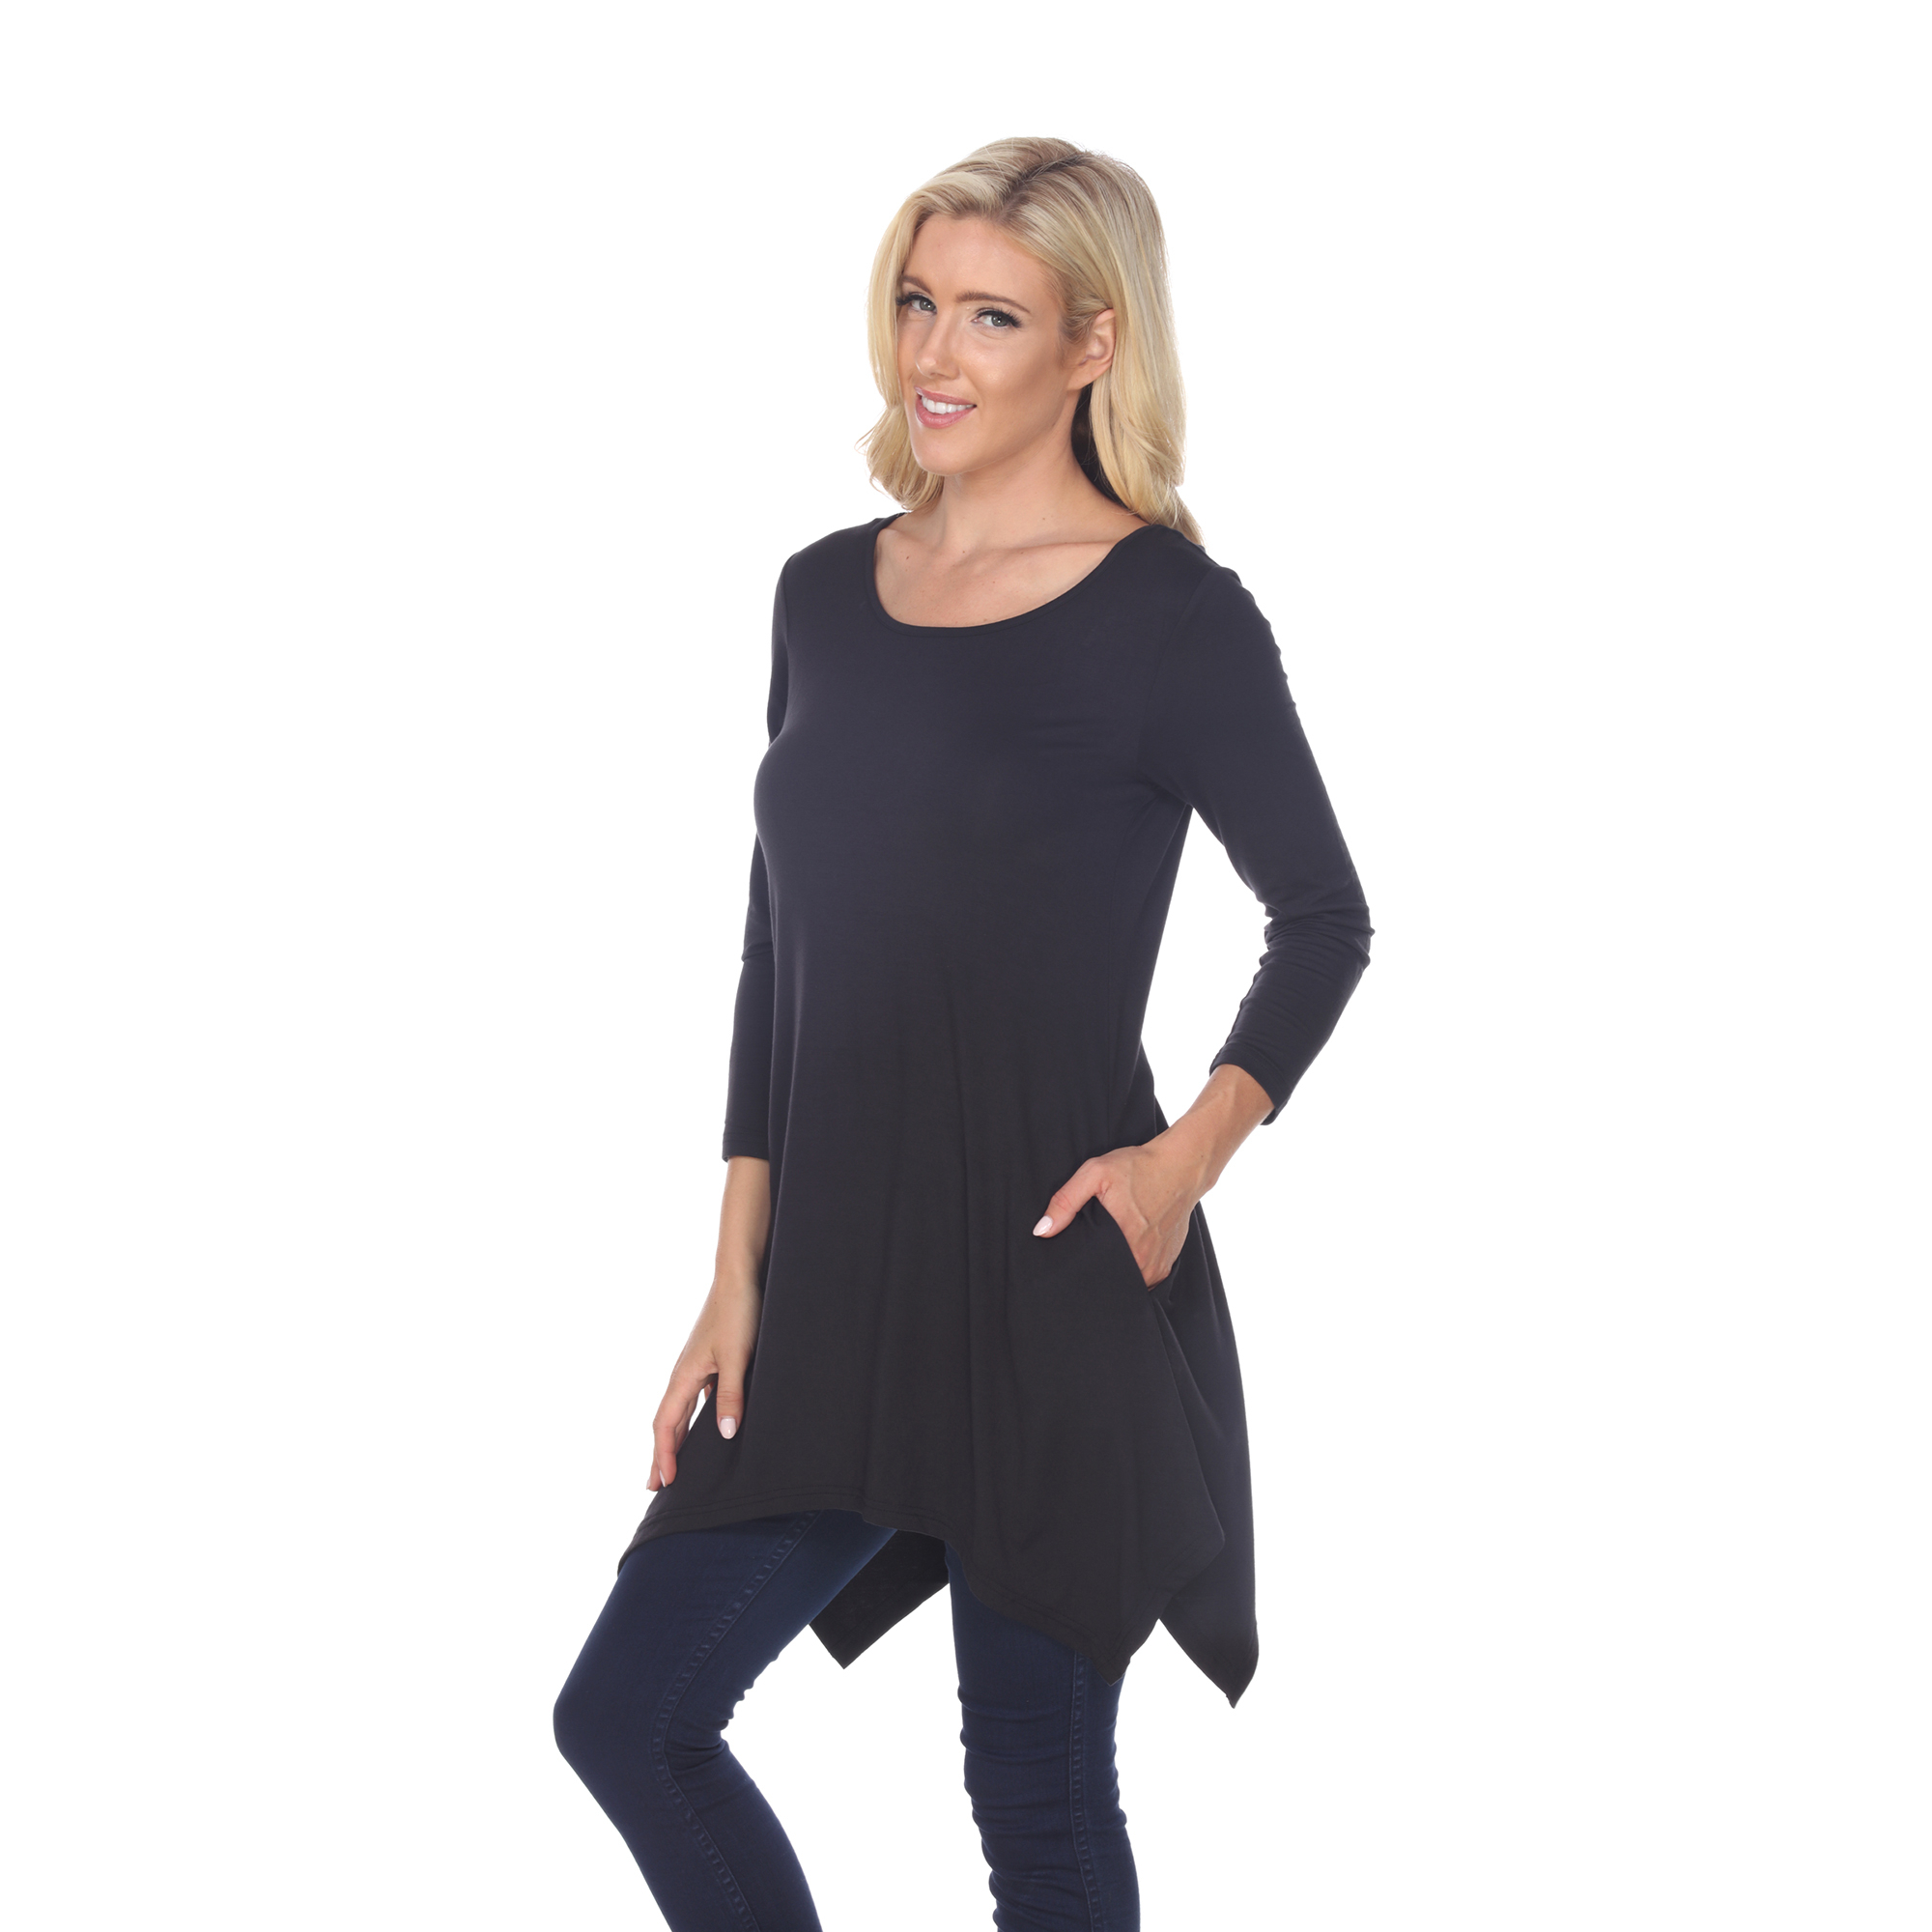 White Mark Women's Quarter Sleeve Tunic Top With Pockets - Charcoal, Medium